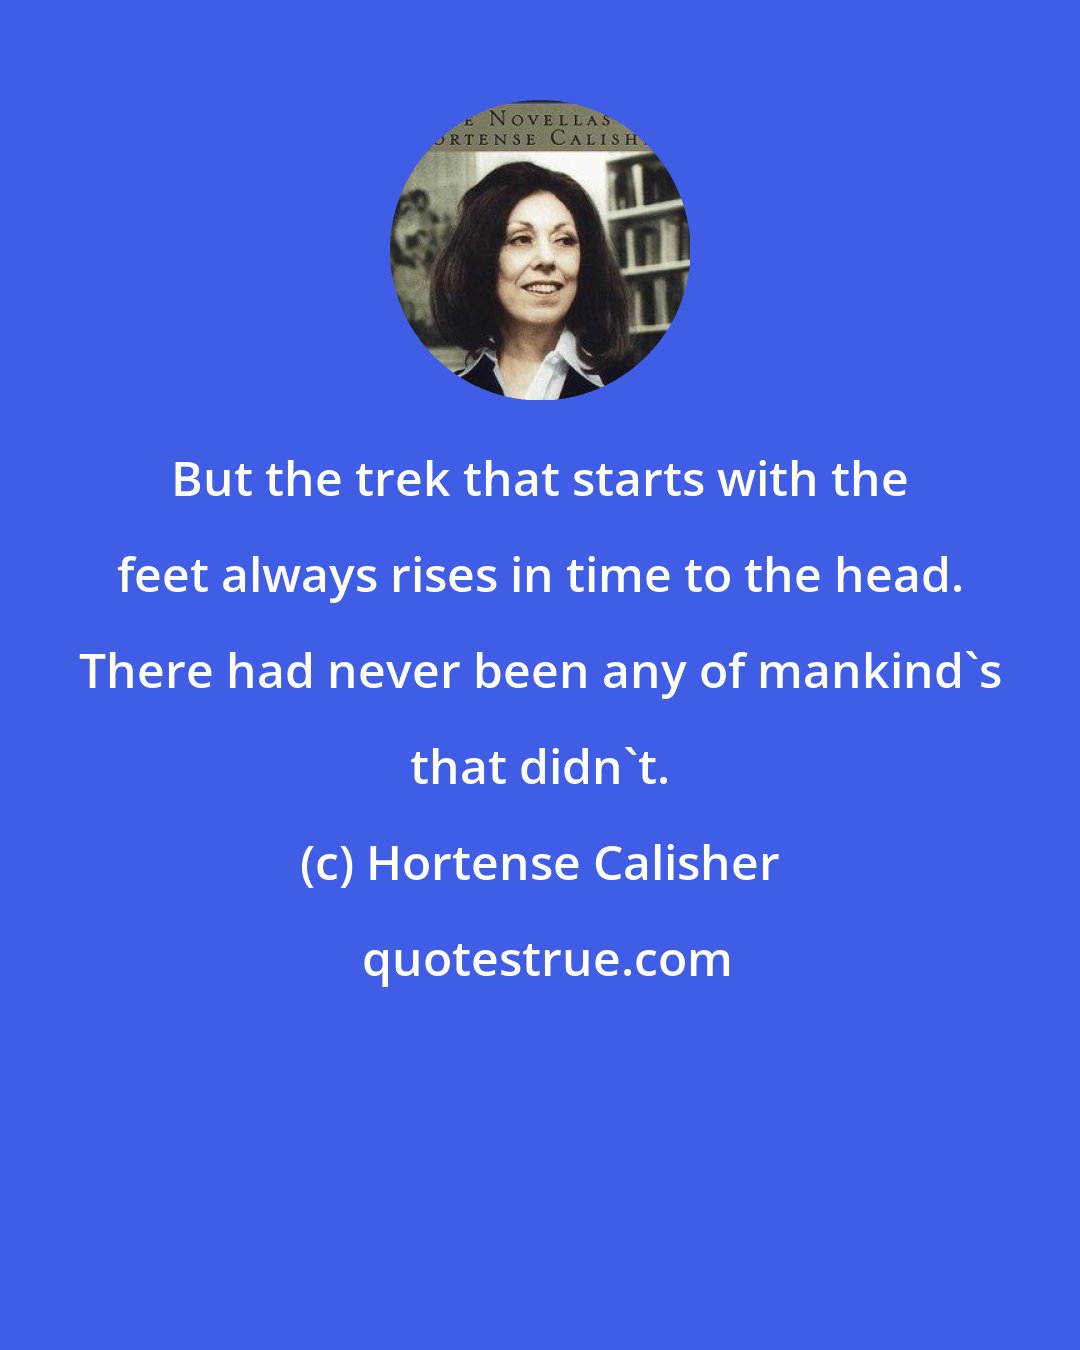 Hortense Calisher: But the trek that starts with the feet always rises in time to the head. There had never been any of mankind's that didn't.